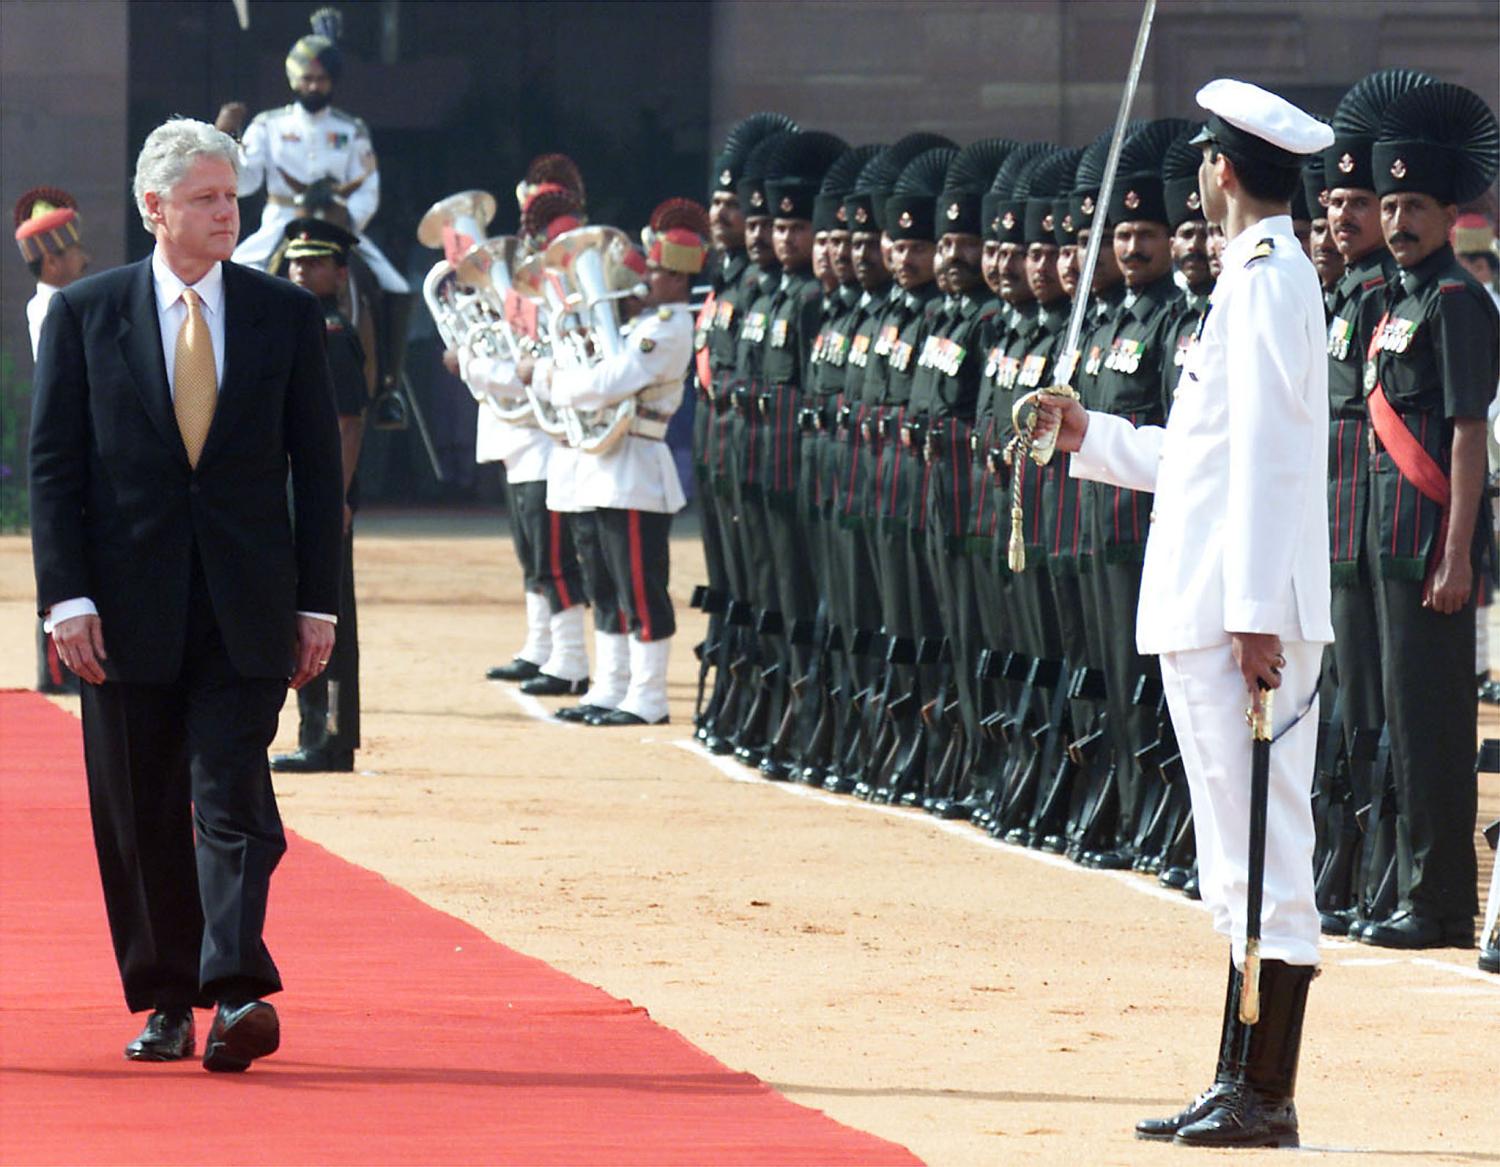 United States President Bill Clinton reviews the honour guard during the official welcoming ceremony at the Presidential Palace in New Delhi March 21. Clinton is on an official five day visit to the region. A massacre of 35 Sikh villagers in the rebellion-torn province of Kashmir cast a shadow over the pomp, ceremony and cordiality planned for President Clinton as he opened his visit to India.TS/CC